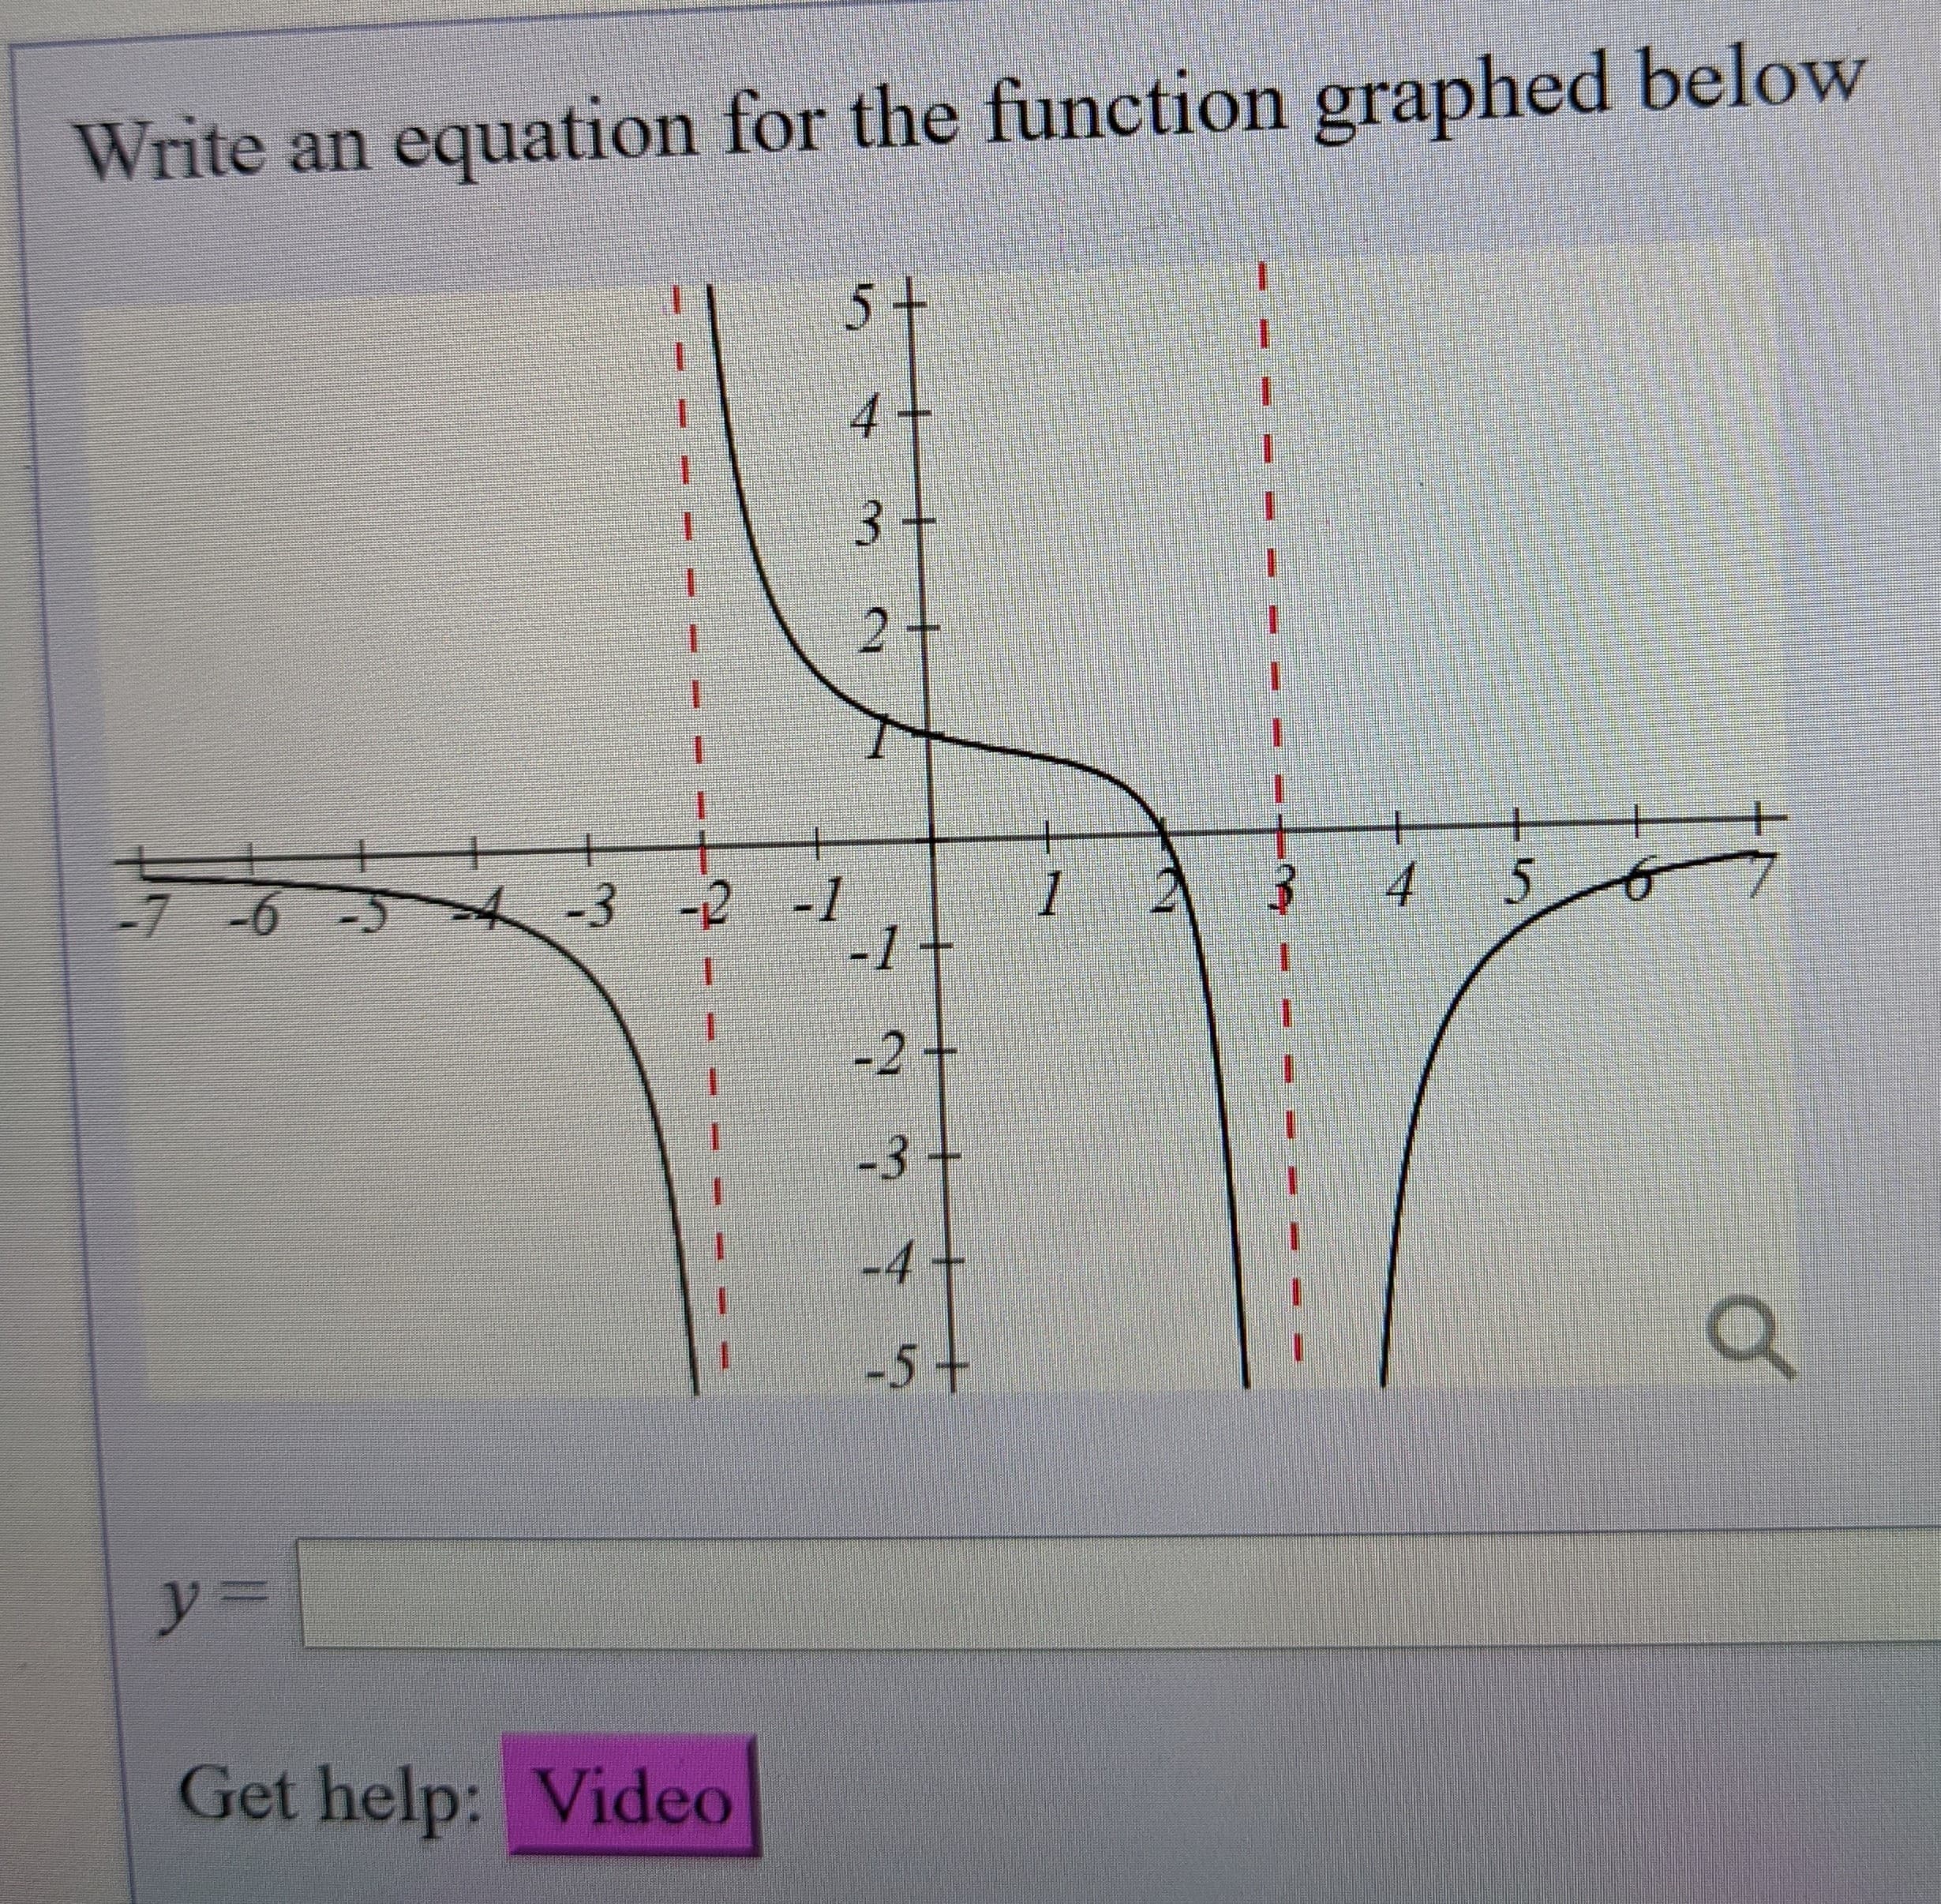 Write an
equation for the function graphed below
